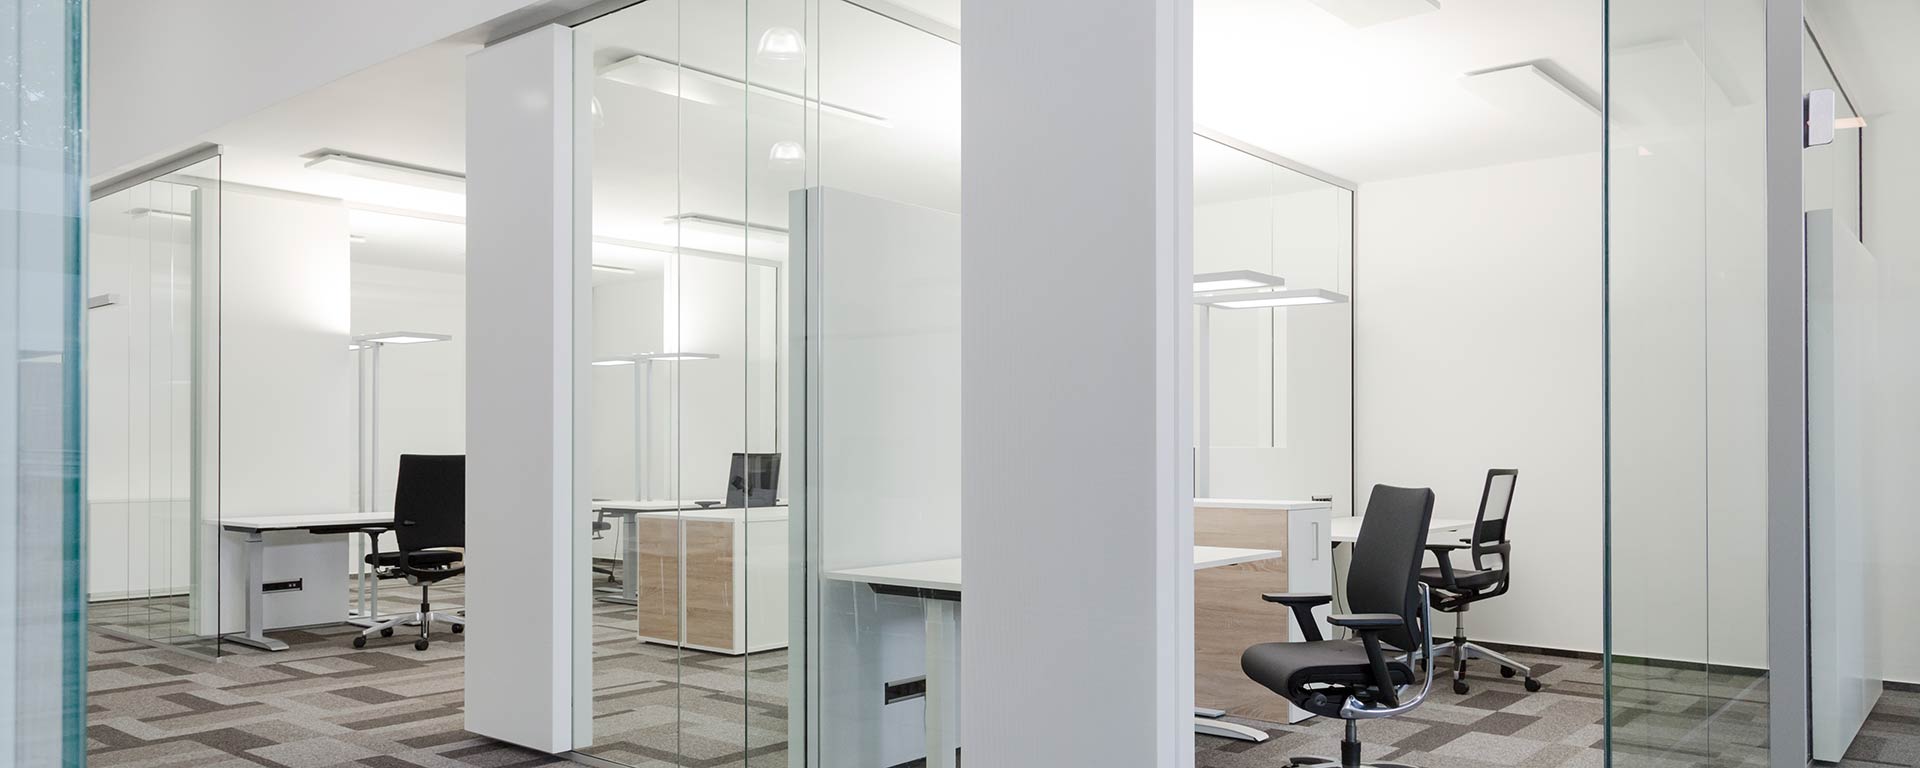 Glass acoustic system for peace and quiet in the office